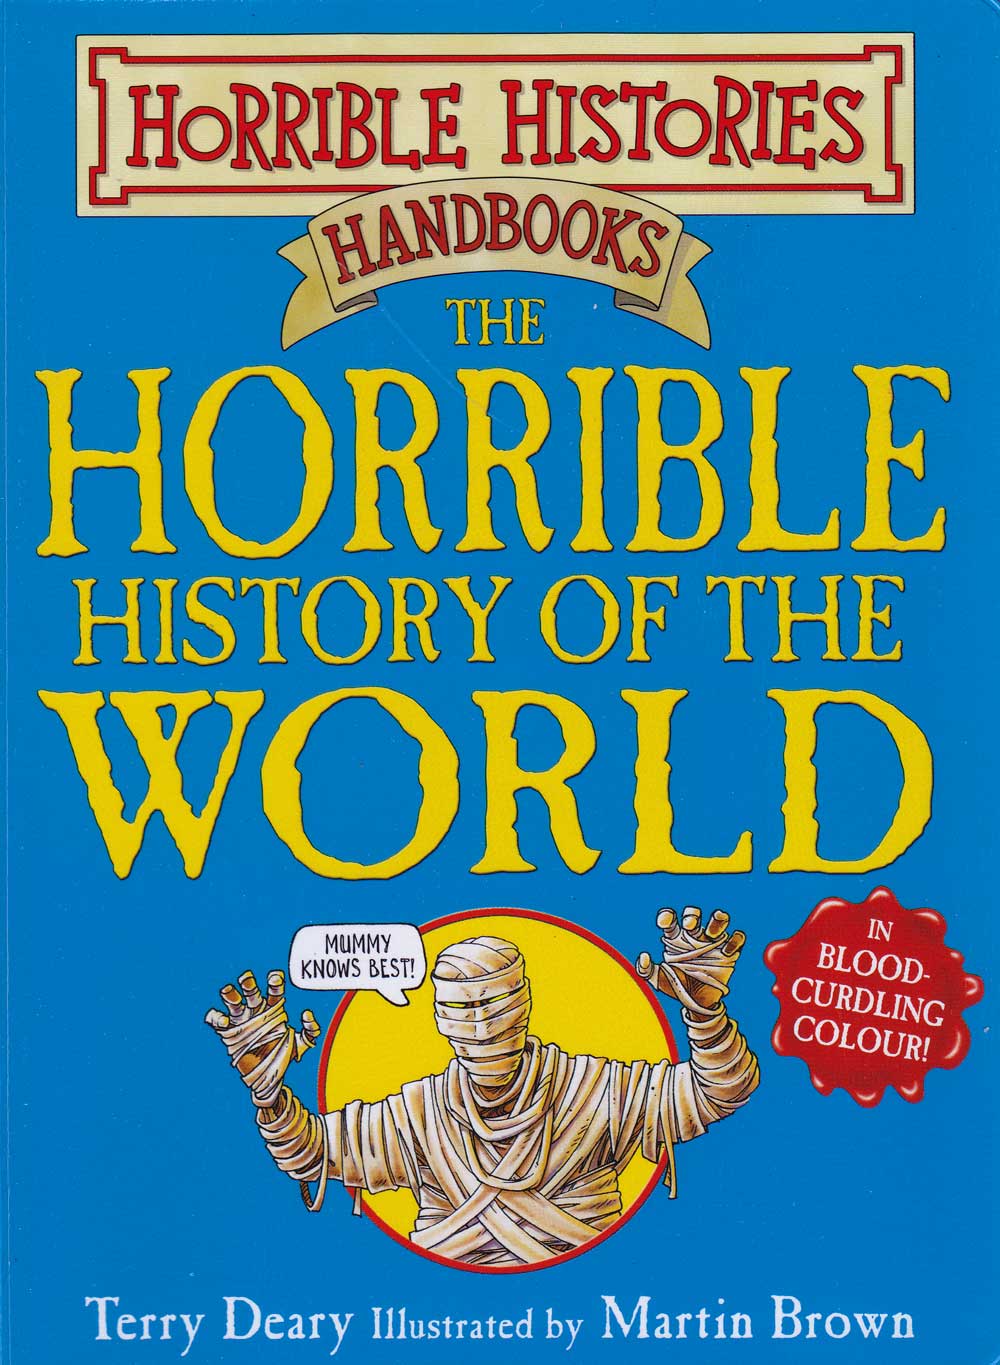 The horrible history of the world